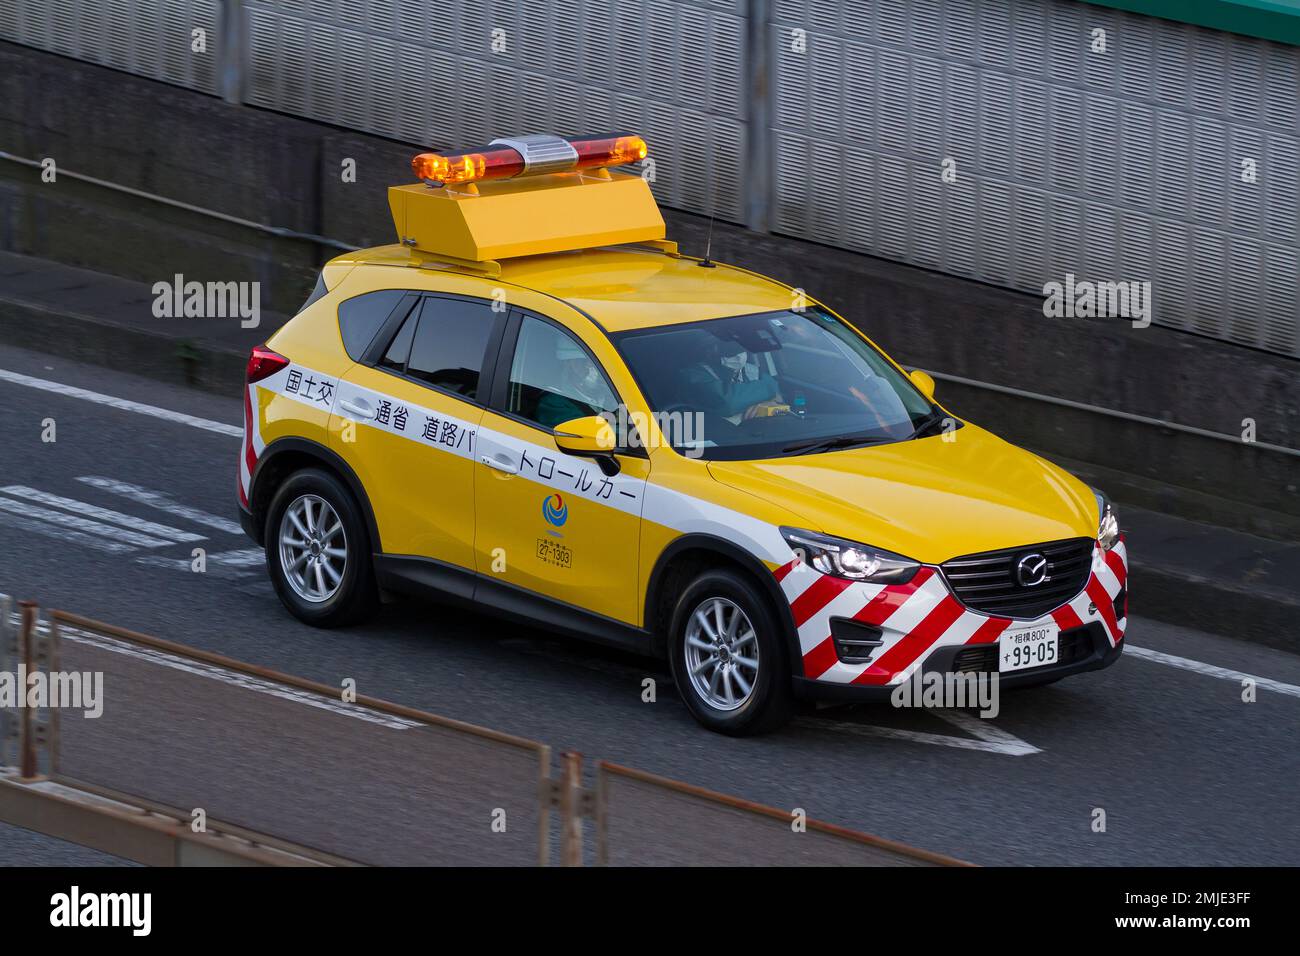 A patrol car operated by the Japanese Transport Ministry to inspect roads and ensure safety on a road in Kanagawa, Japan. Saturday Japan Stock Photo